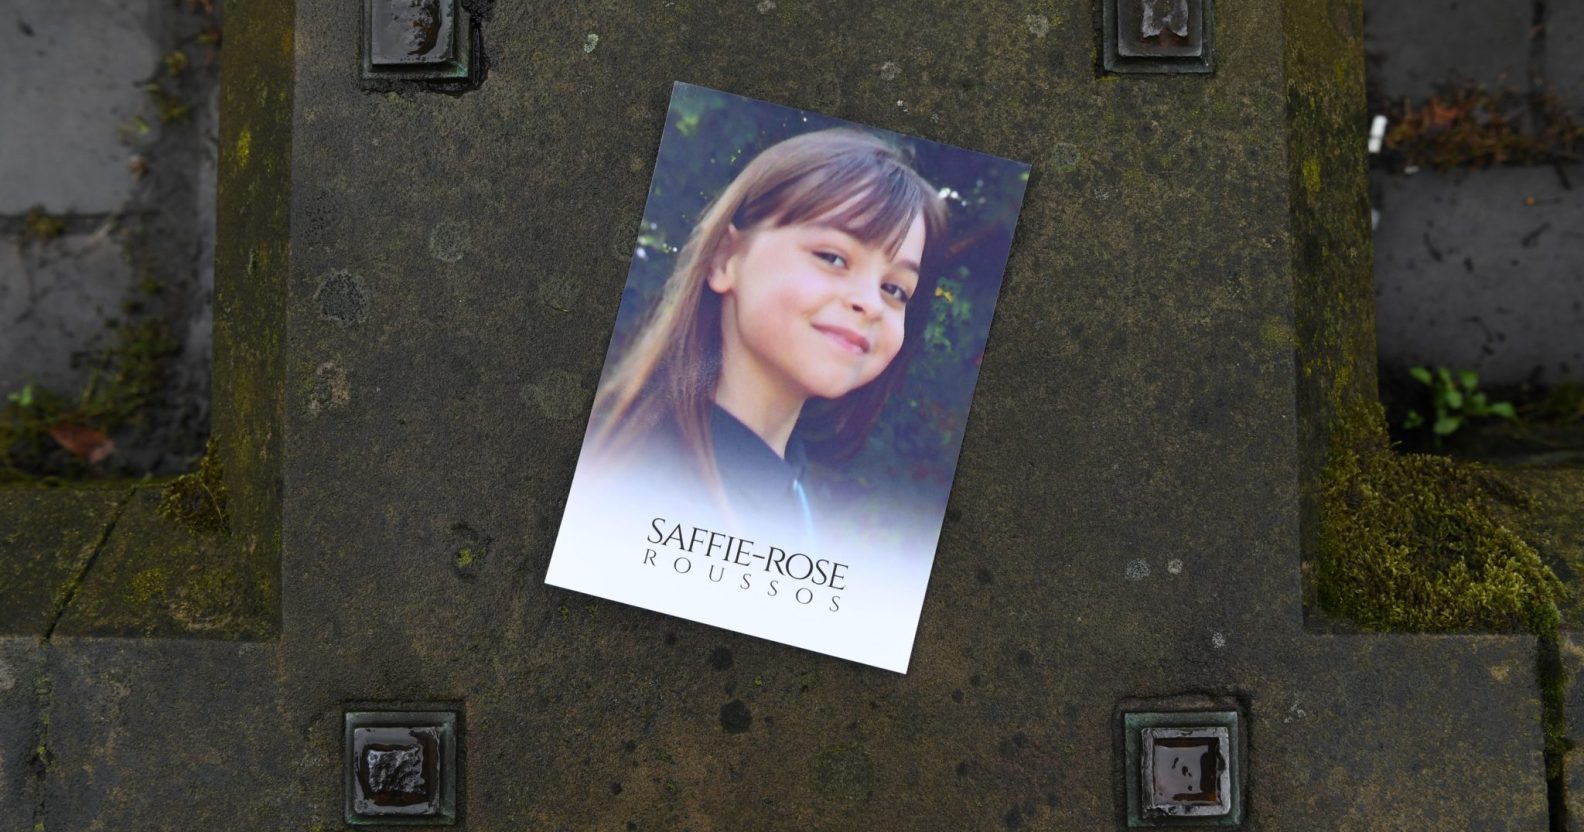 An order of service for the funeral of Manchester Arena bomb victim Saffie-Rose Roussos